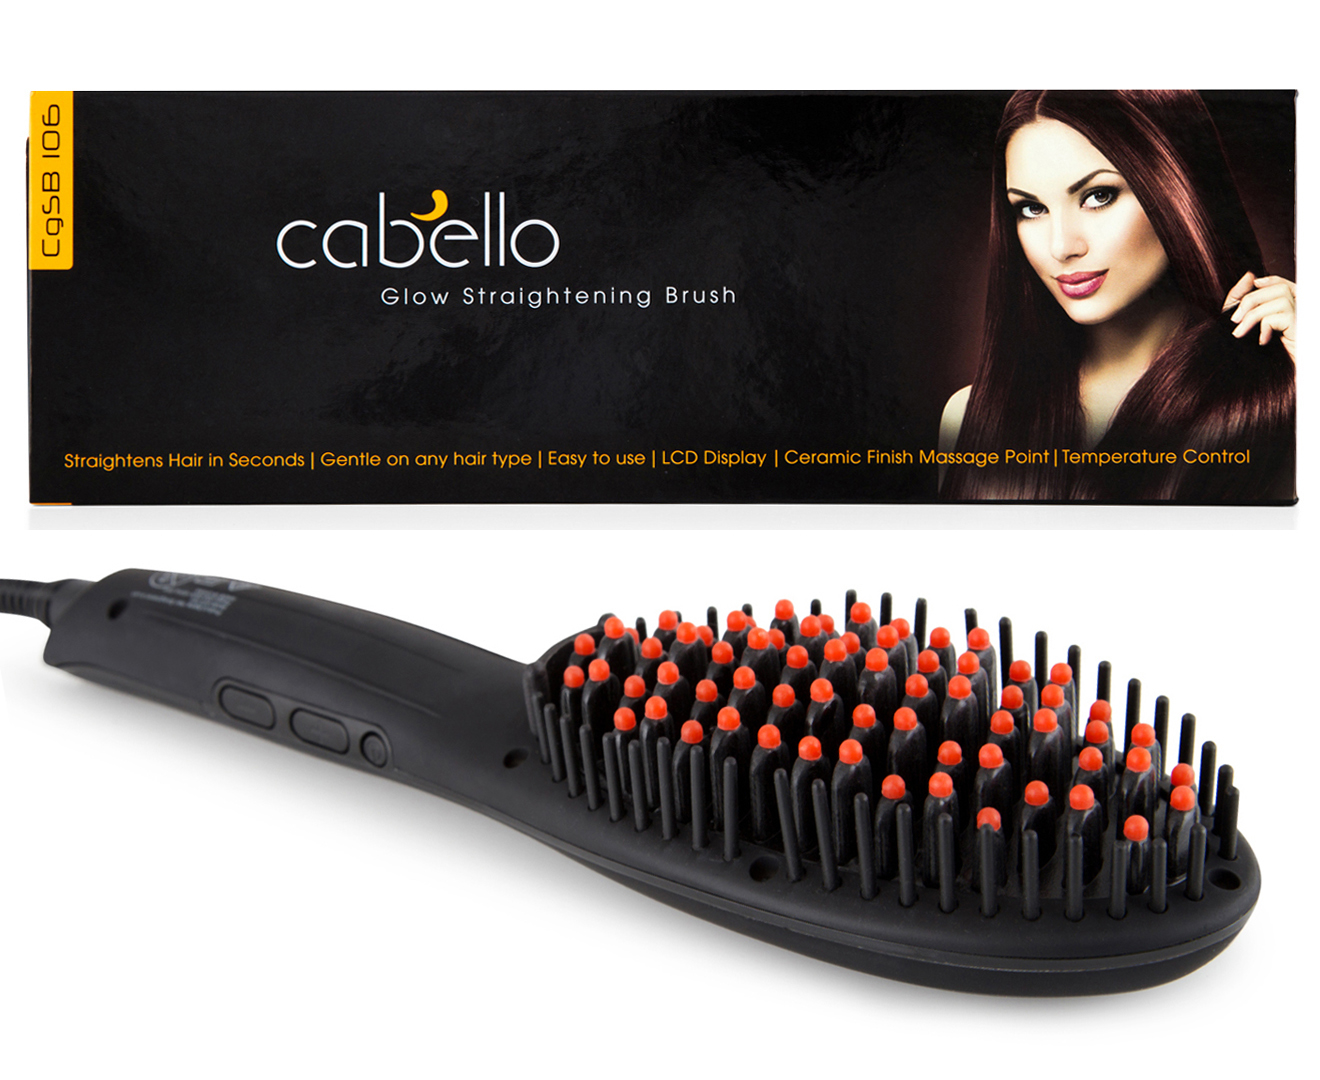 Cabello Glow Straightening Brush Great Daily Deals At